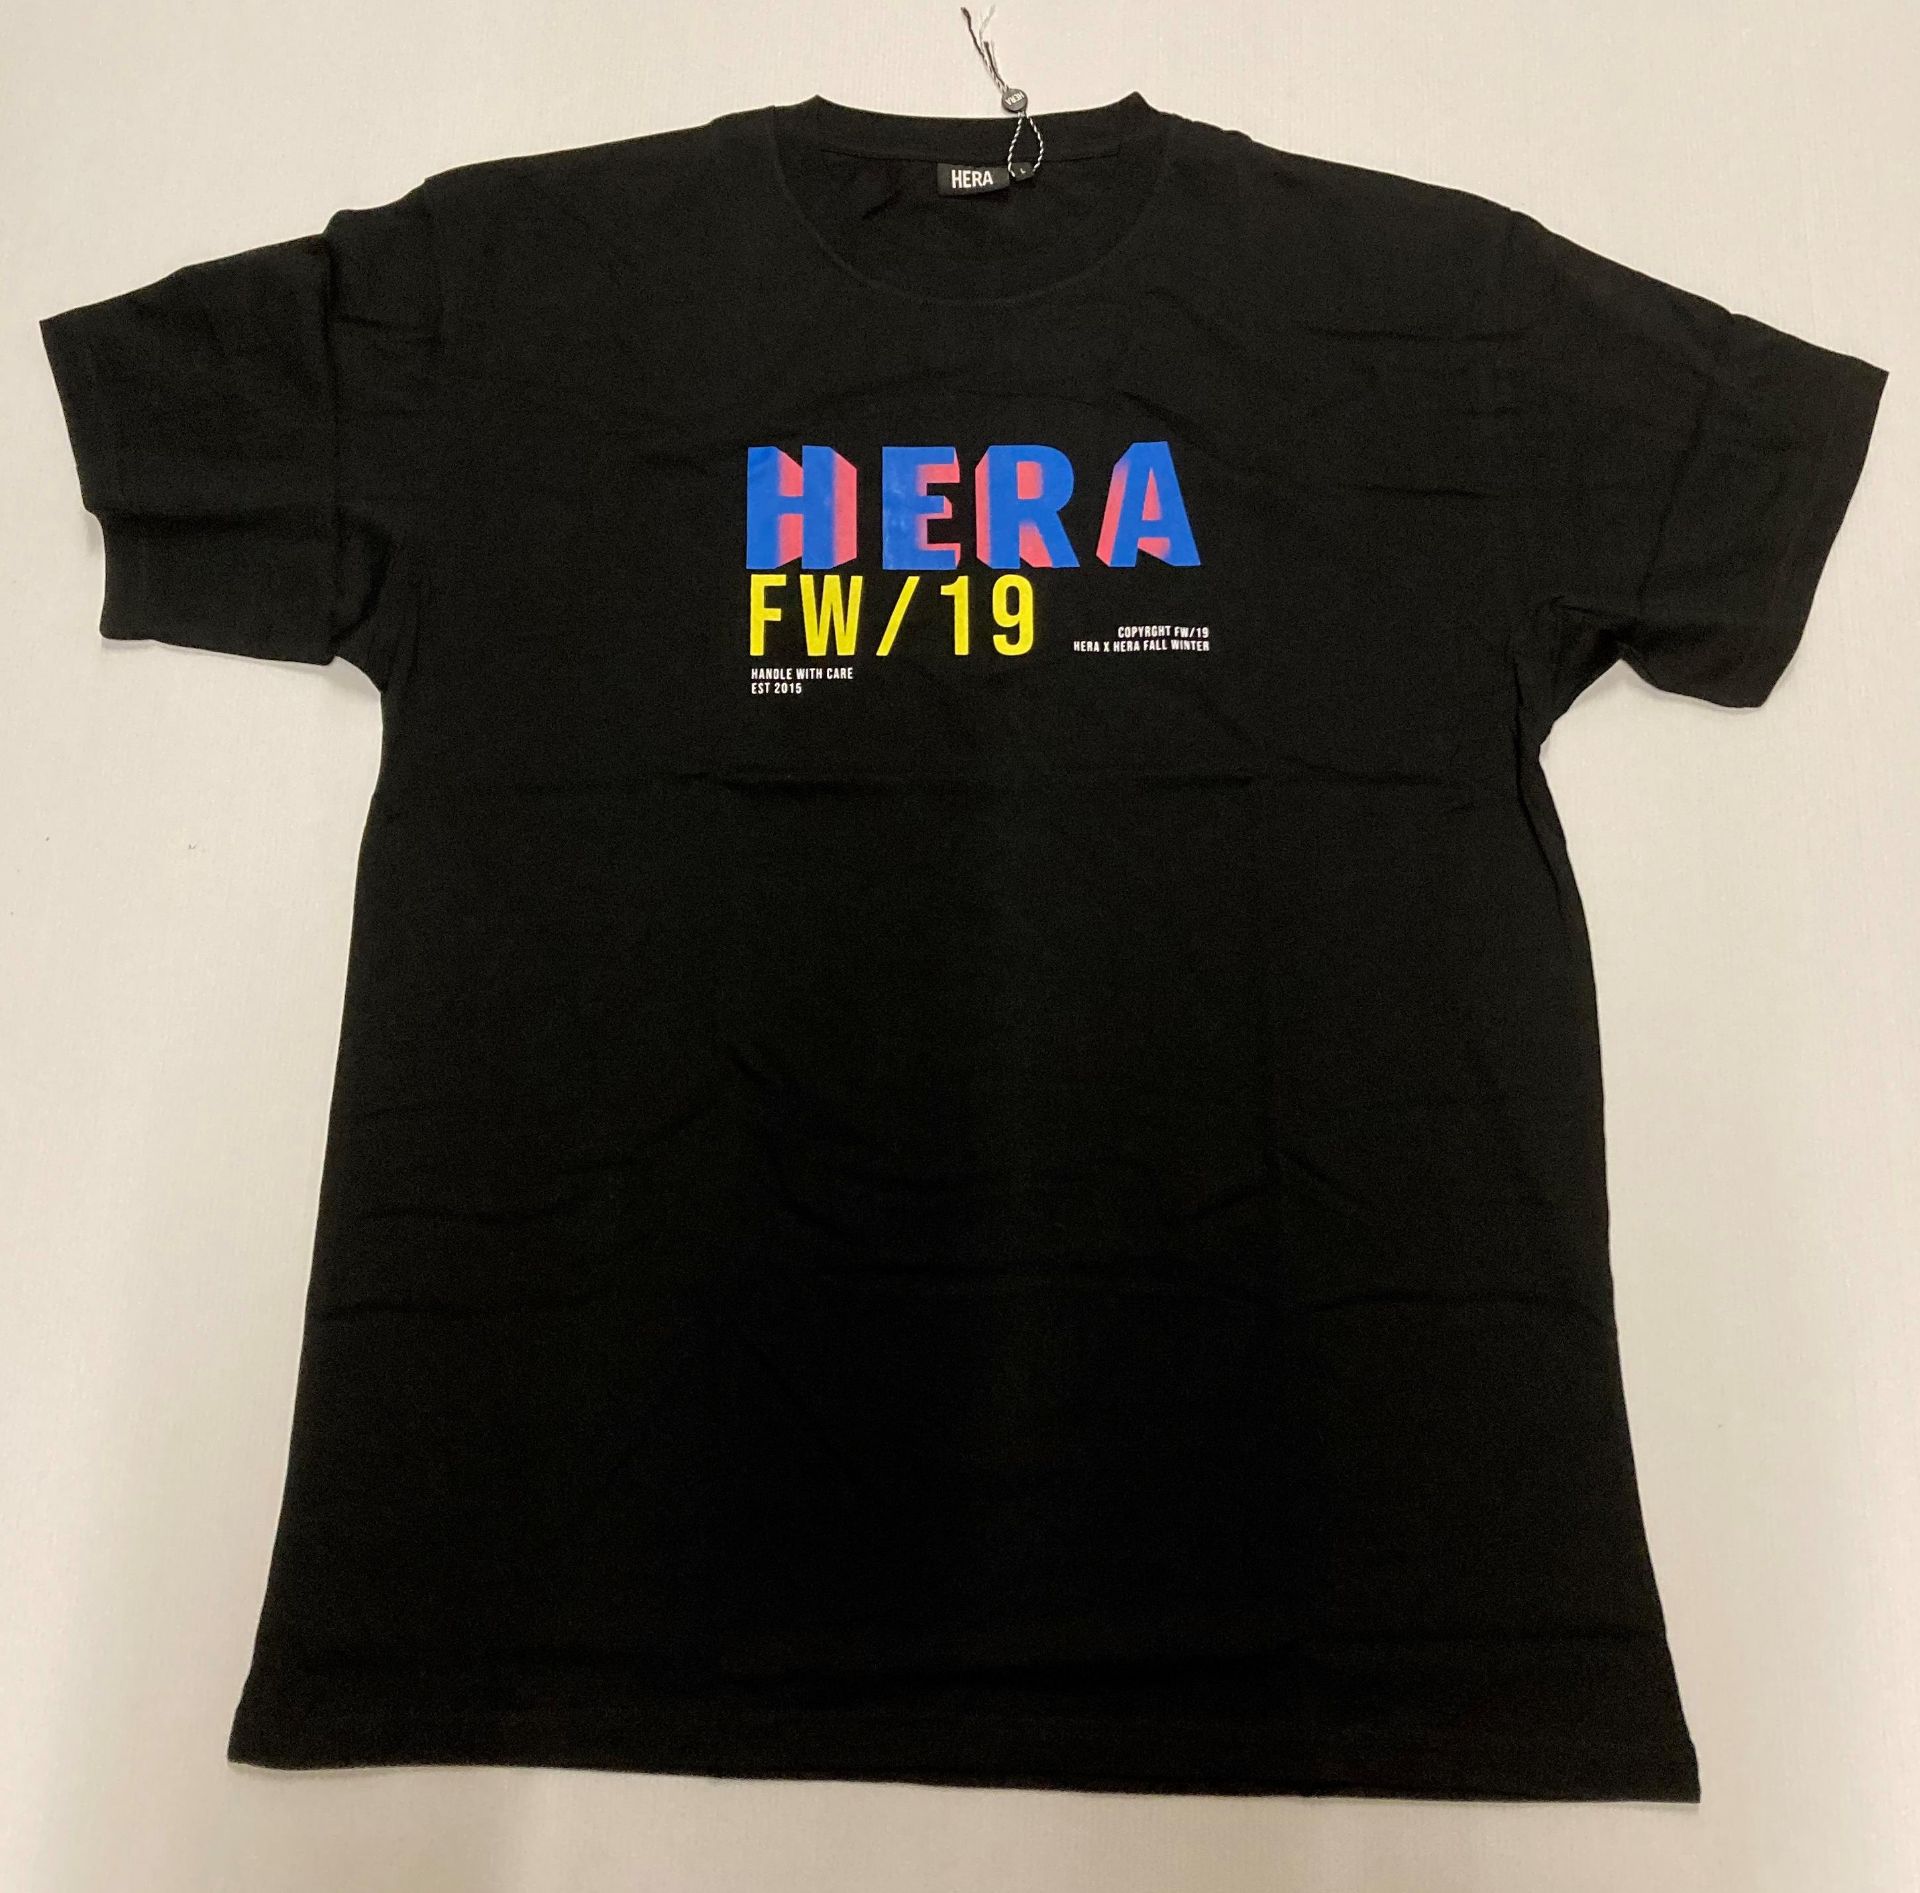 4 x items - 3 x Hera t-shirts, black with blue and pink text (2 x L, 1 x M) and 1 x Hera t-shirt,